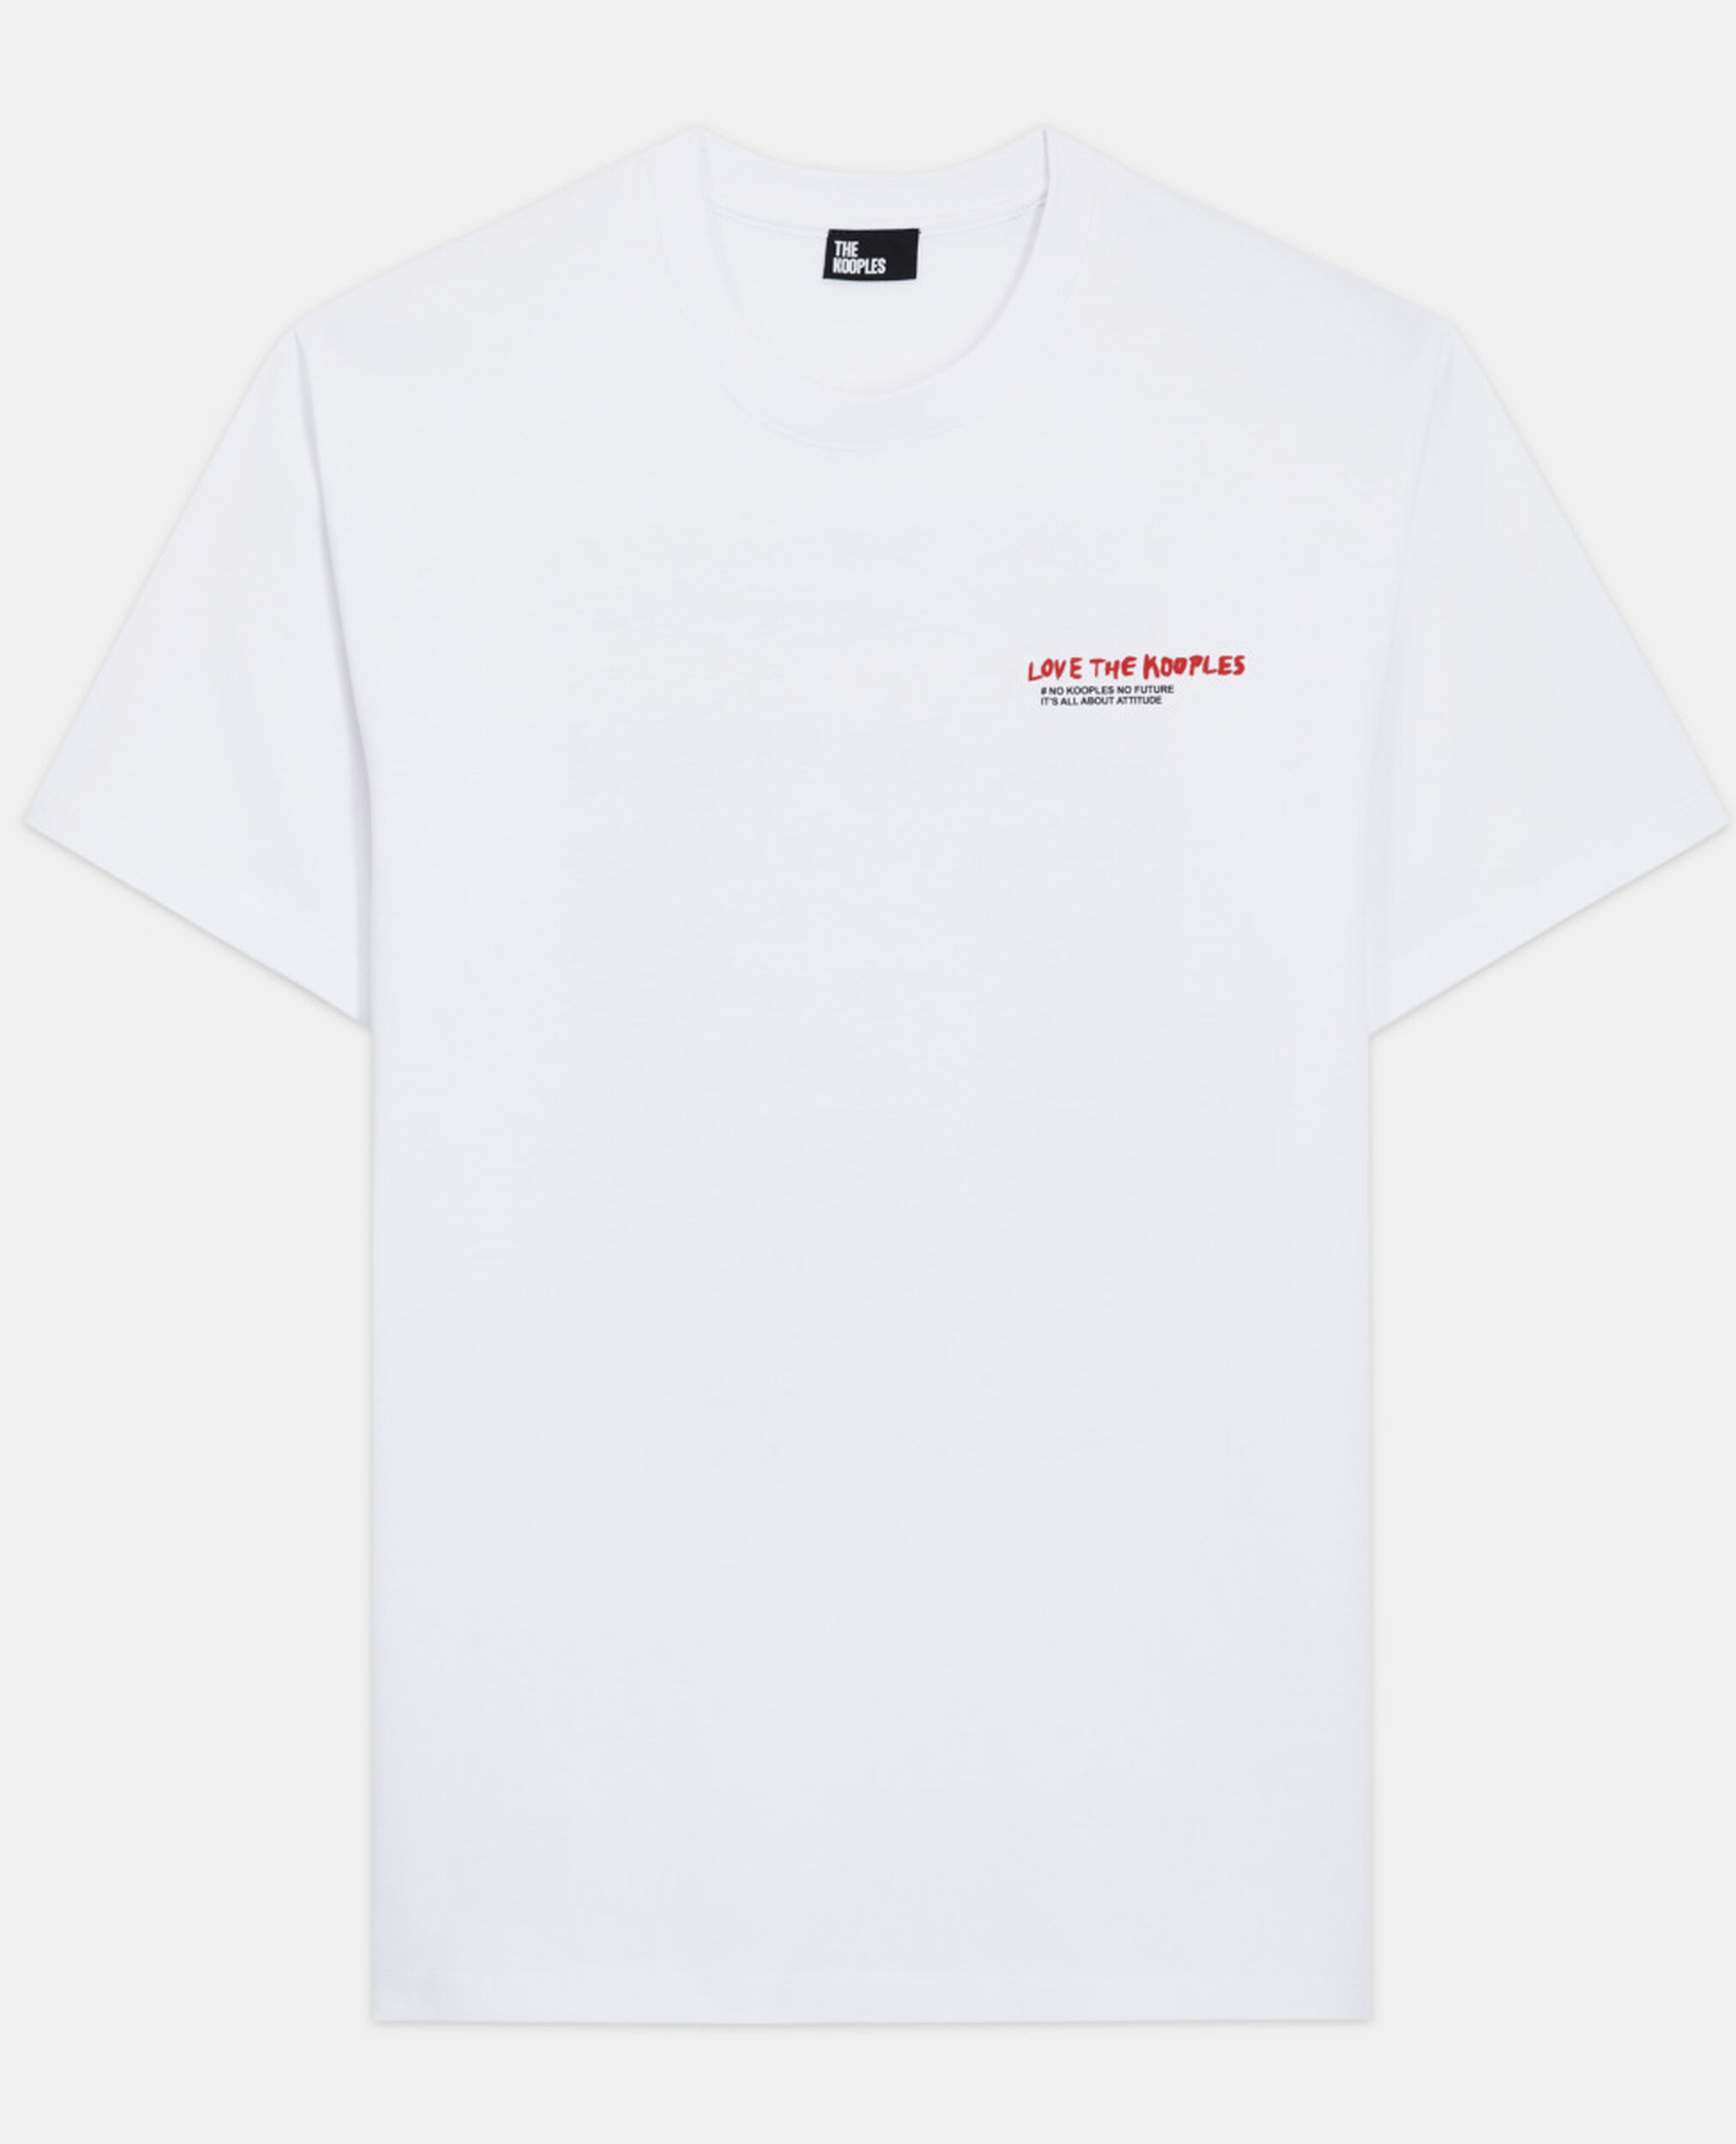 Weißes T-Shirt I love Kooples, WHITE, hi-res image number null